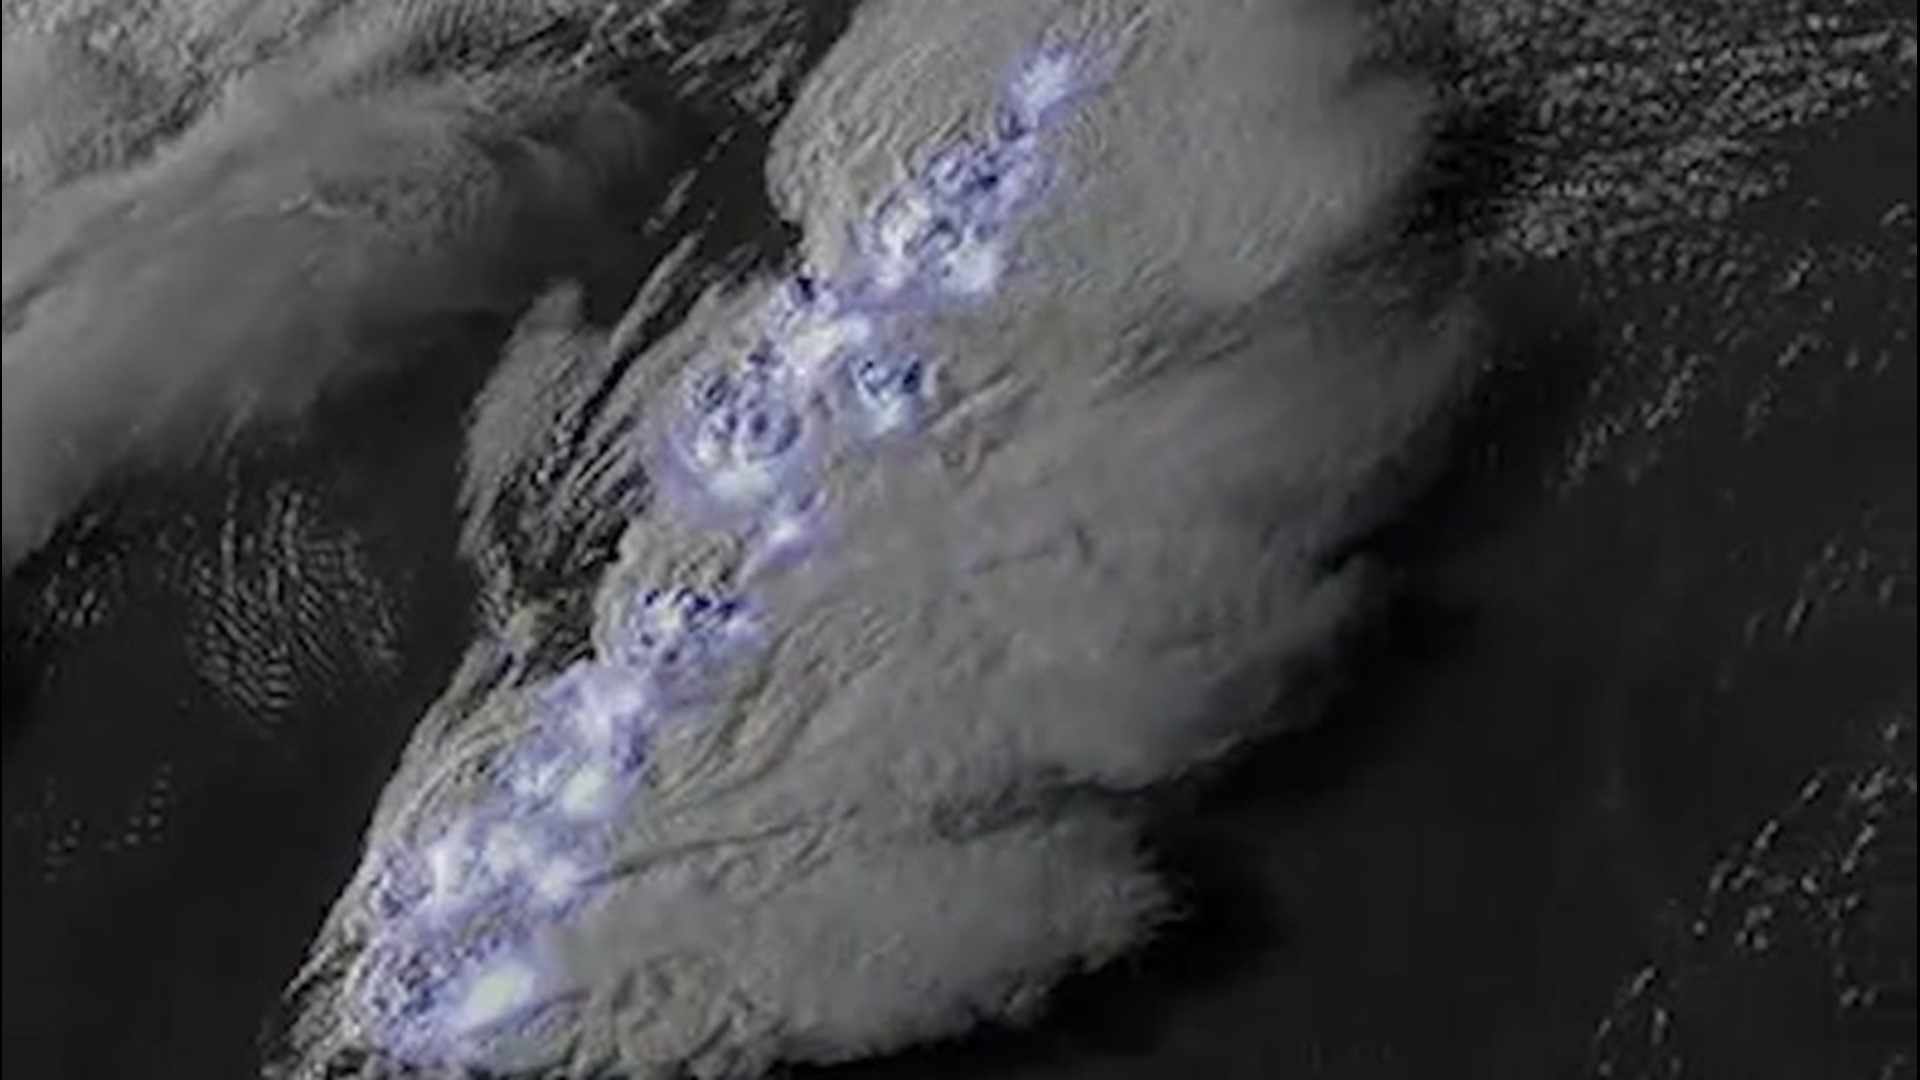 Satellite footage recorded by the National Oceanic and Atmospheric Administration captured the severe storms over Texas and other Southern states on May 3 and 4.